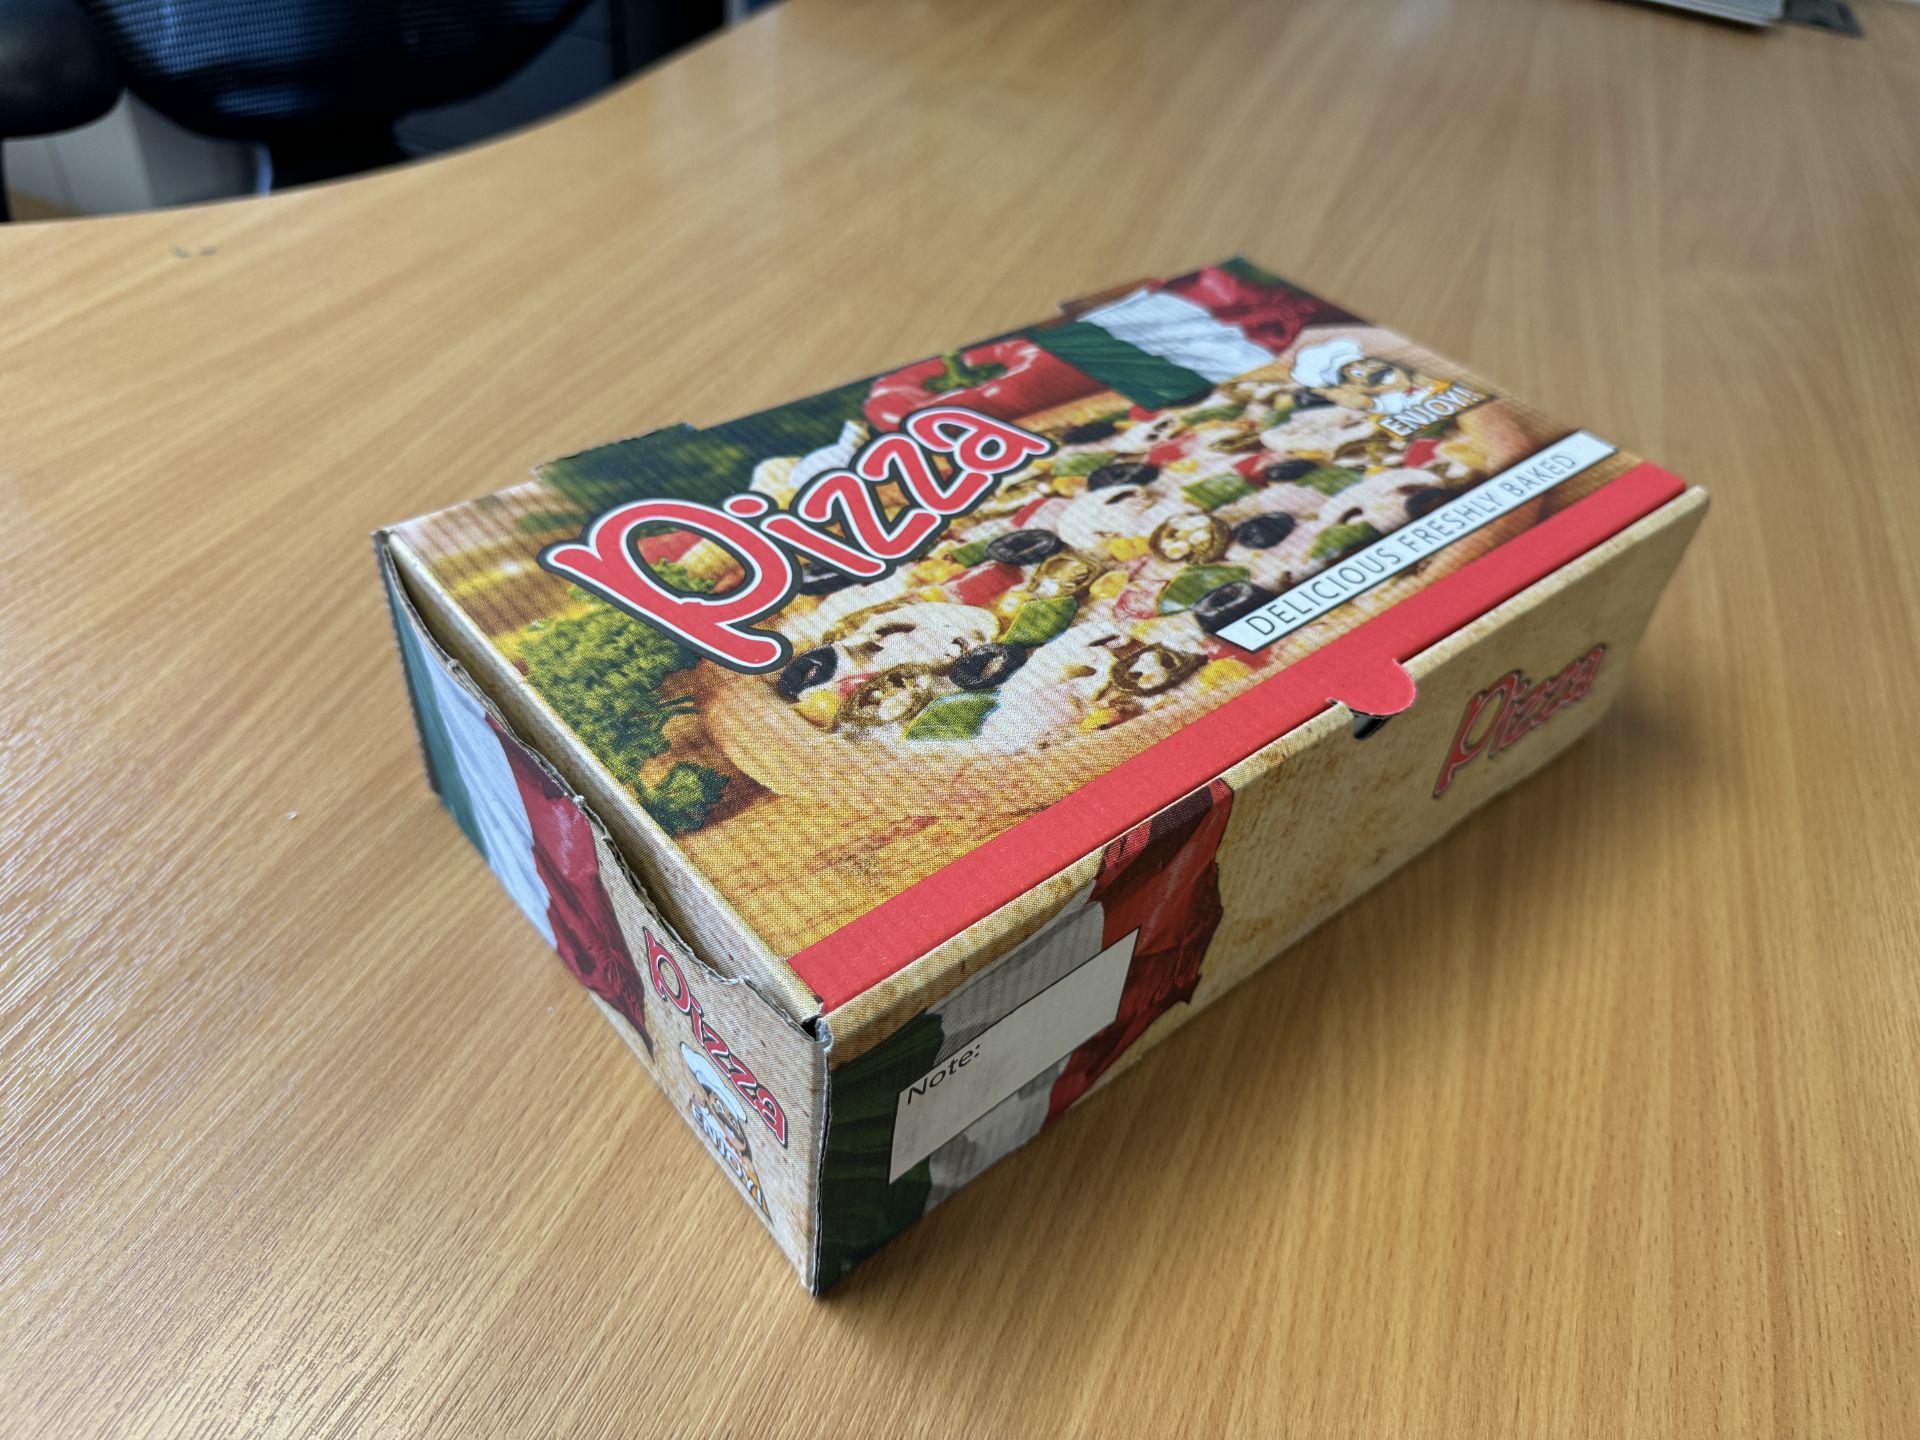 Circa 900 - Enjoy Calzone Boxes (Cardboard) - Multiple Uses RRP £130 - Image 2 of 6